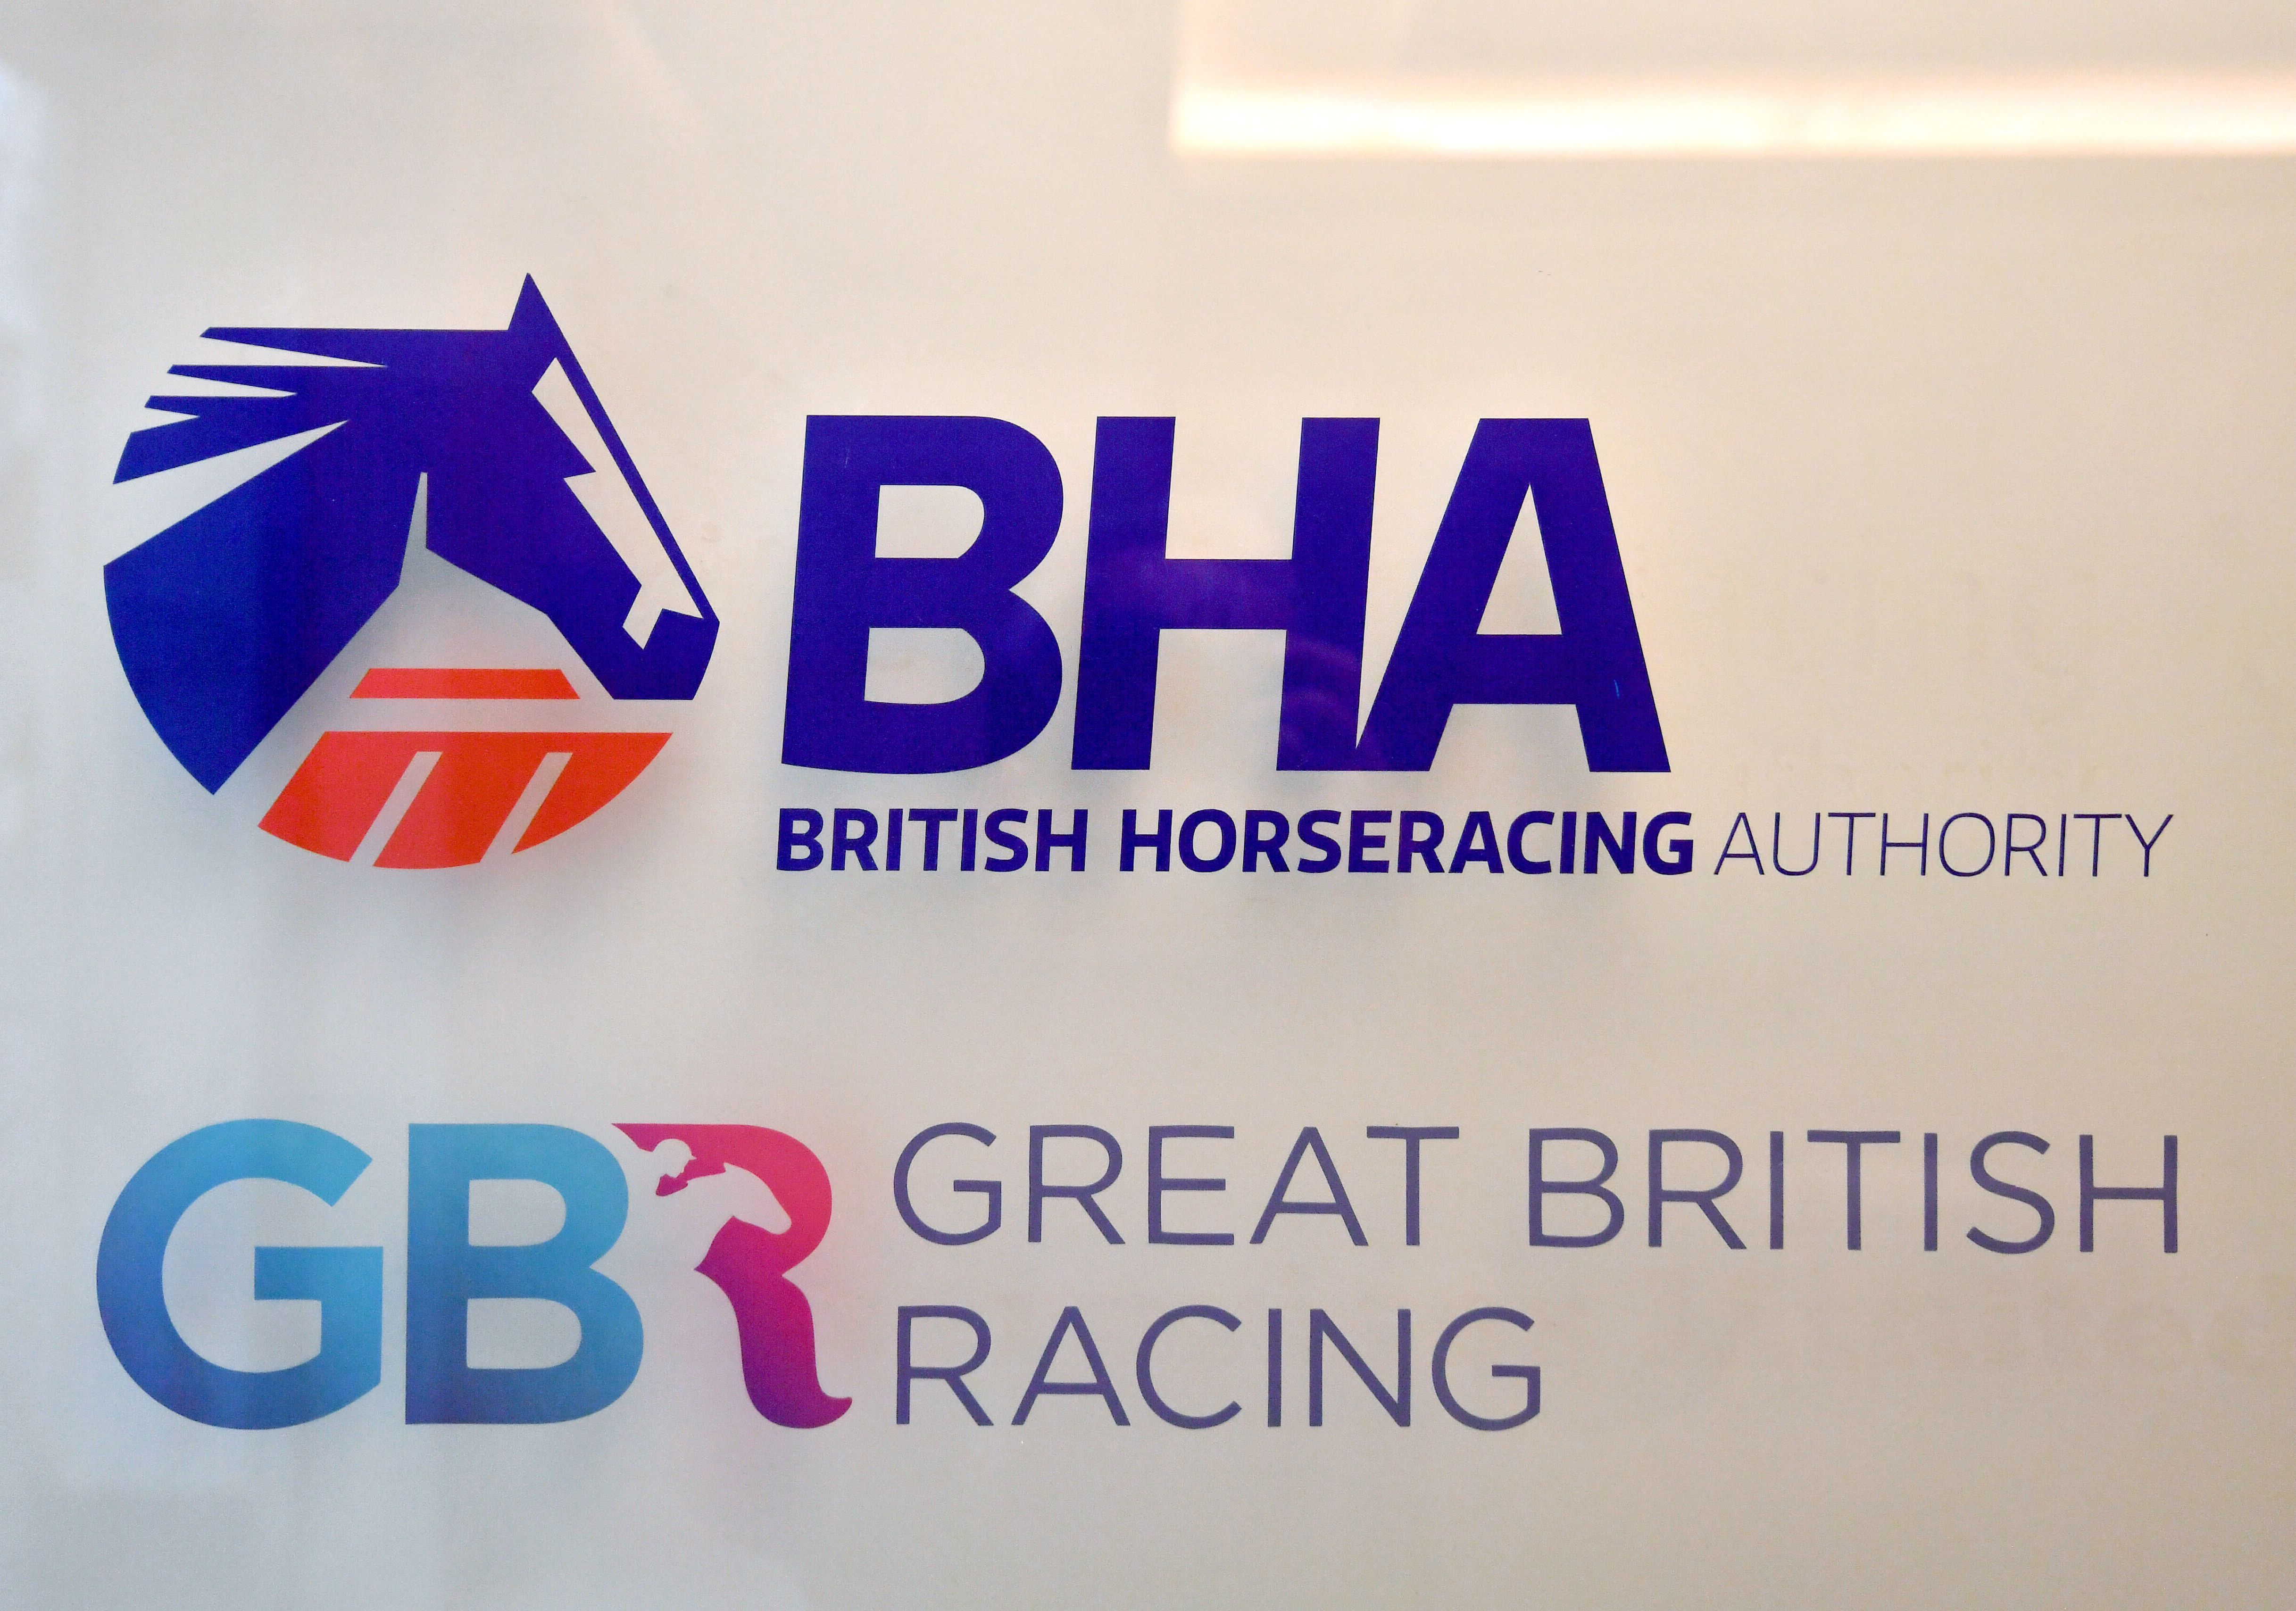 The British Horseracing Authority has been working hard with racing's stakeholders